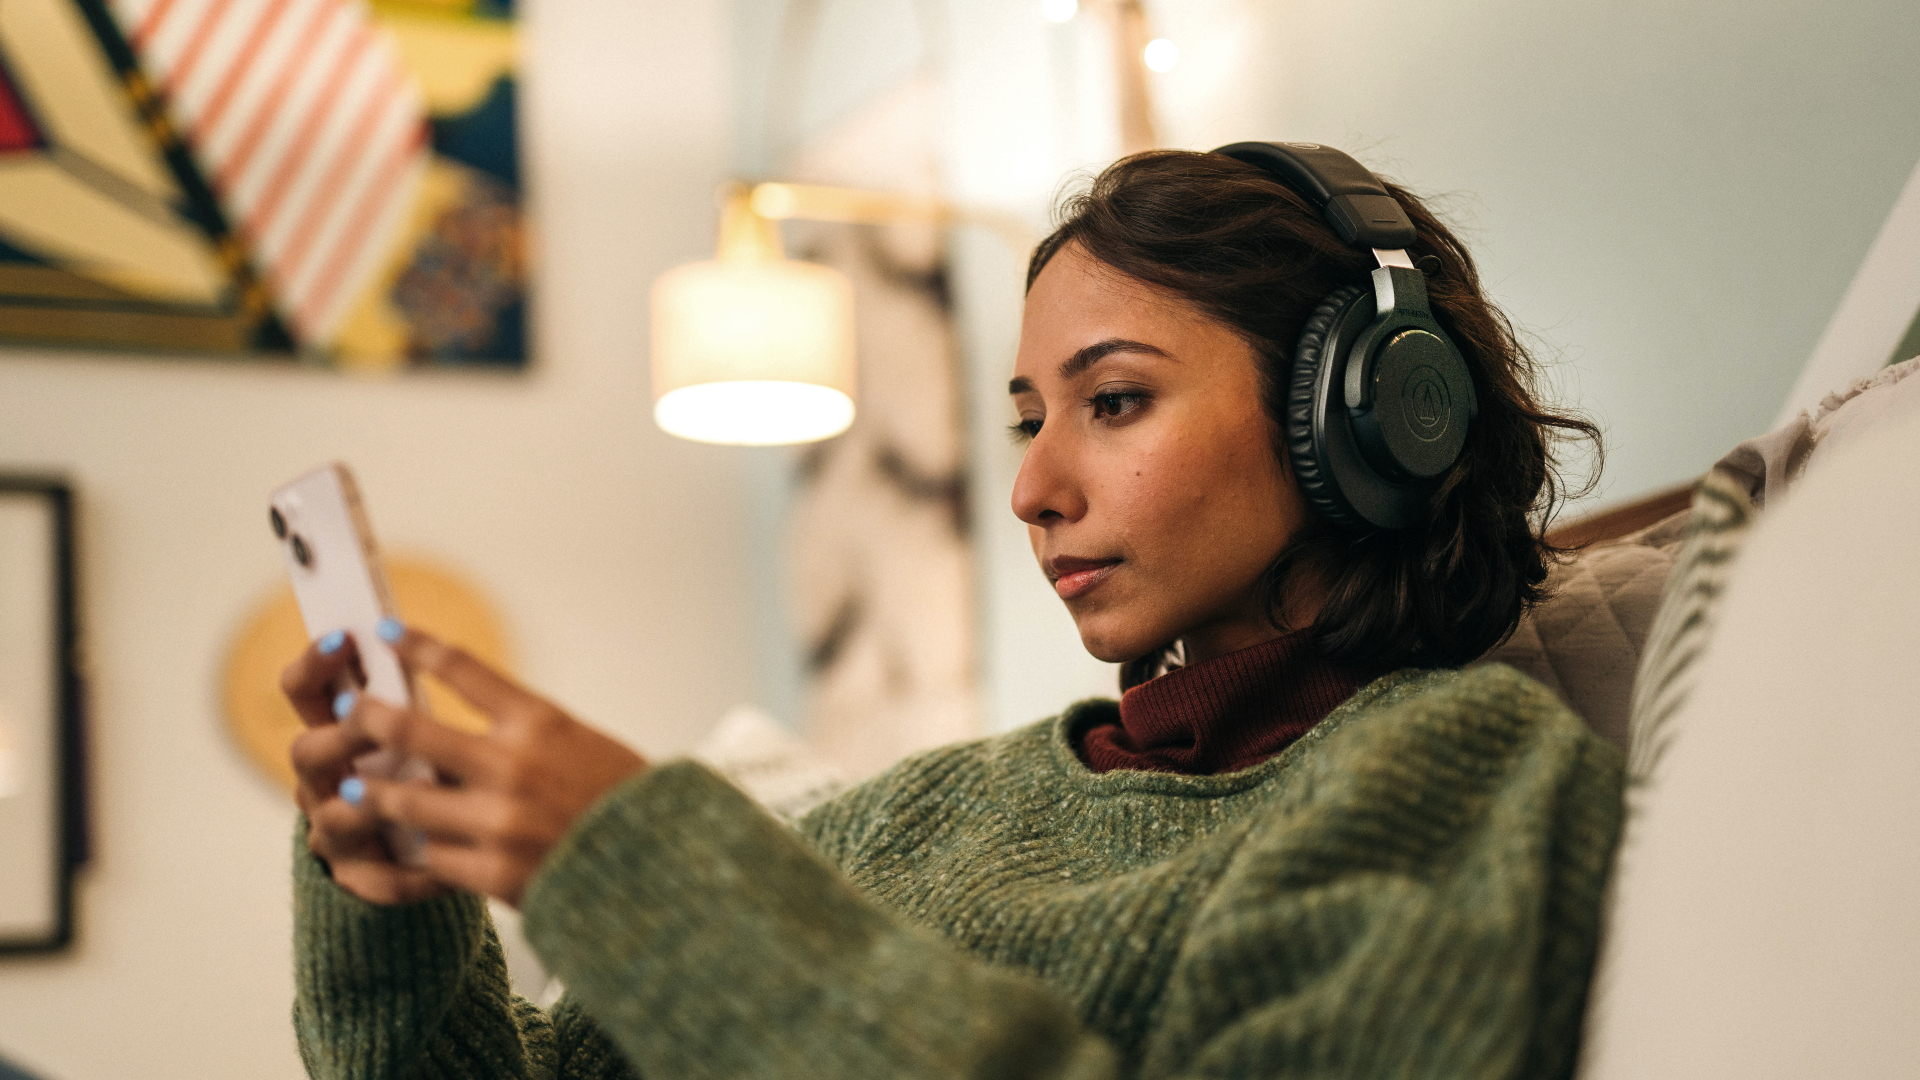 Audio-Technica ATH-M20xBT worn by a woman using her phone